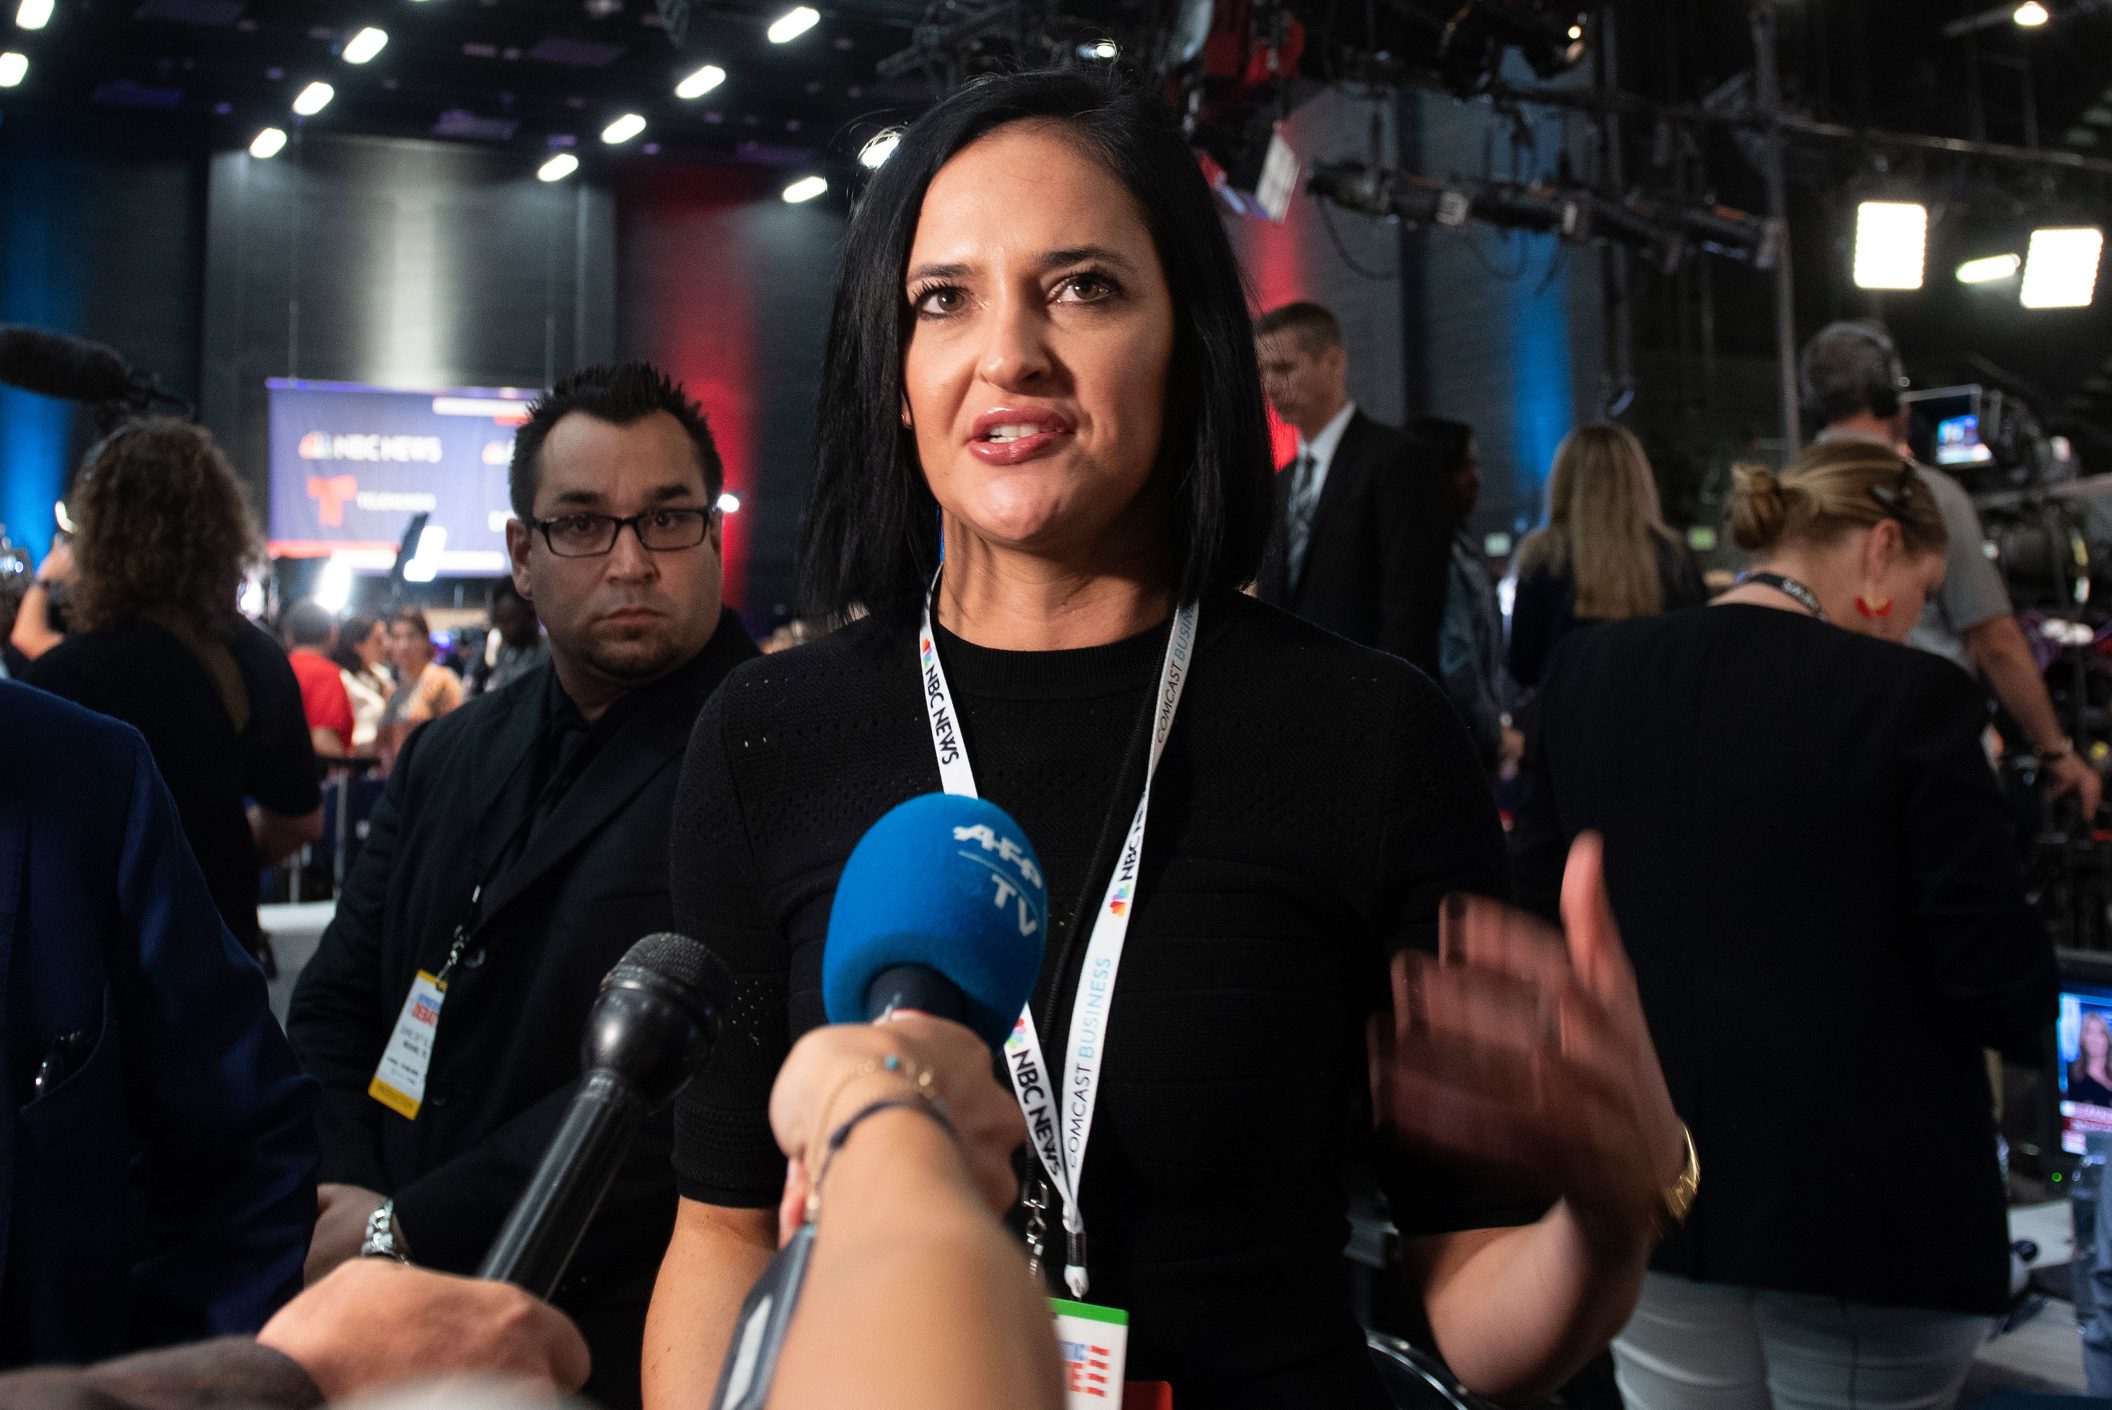 Democratic presidential hopeful Pete Buttigieg's spokesperson Lis Smith speaks to the press in the Spin Room after participating in the second Democratic primary debate of the 2020 presidential campaign season hosted by NBC News at the Adrienne Arsht Center for the Performing Arts in Miami, Florida, June 27, 2019.